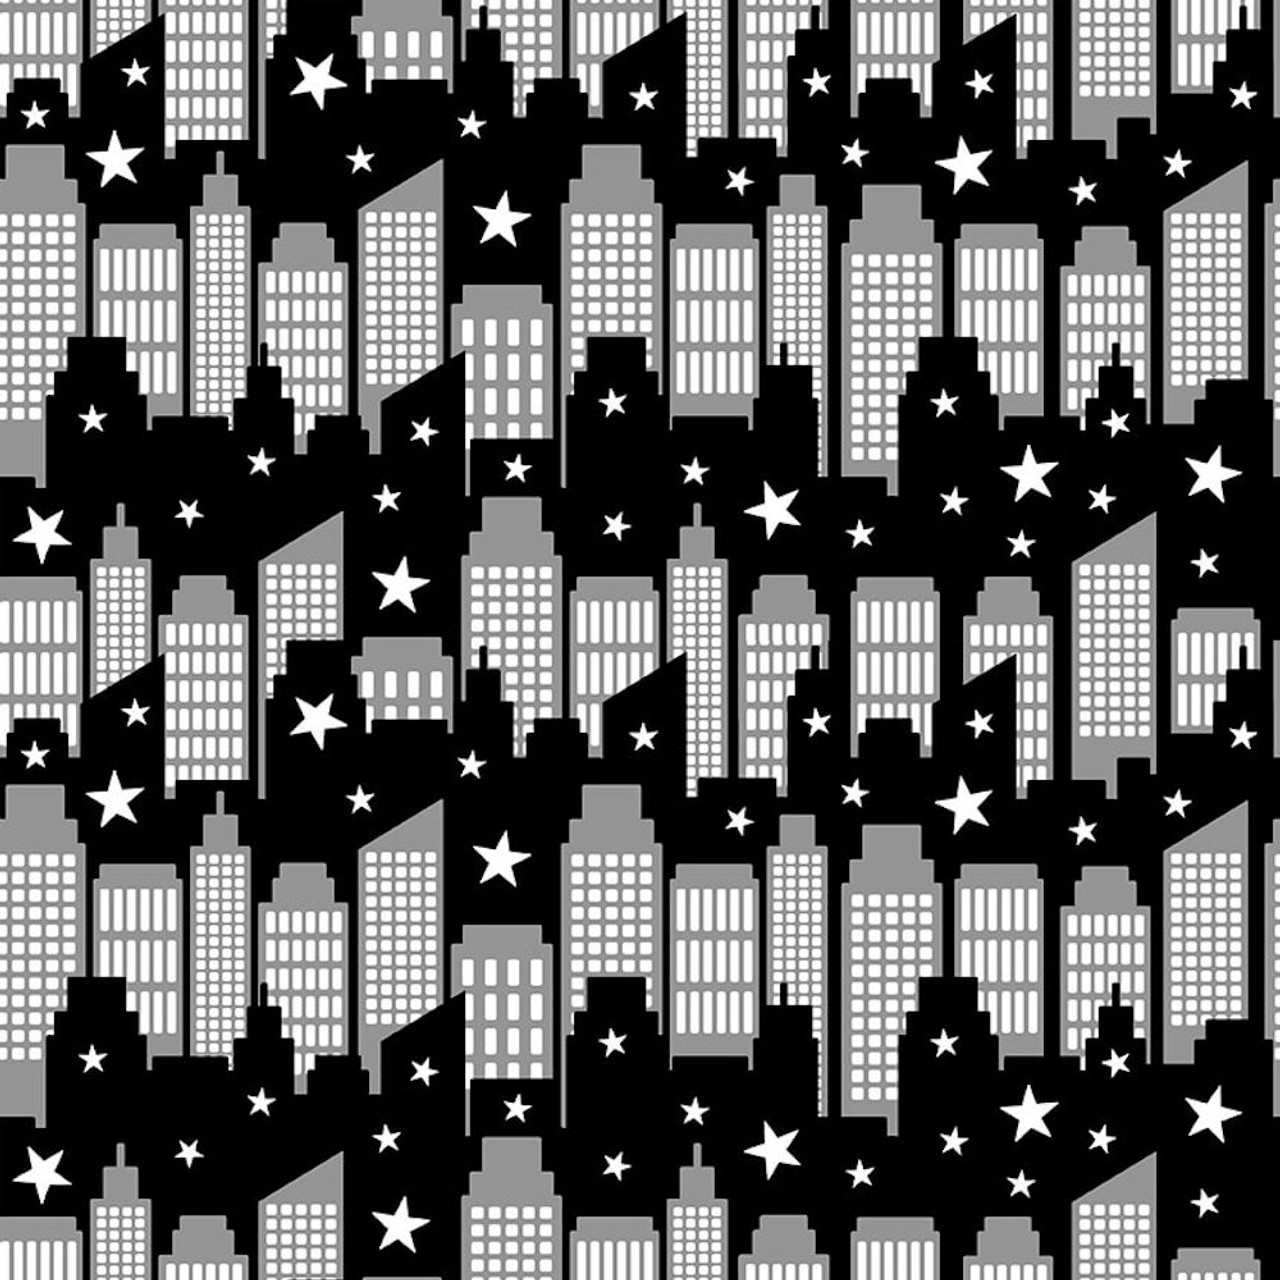 Blank Quilting Superheroes Wear Masks City Scene Black Cotton Fabric By The Yard